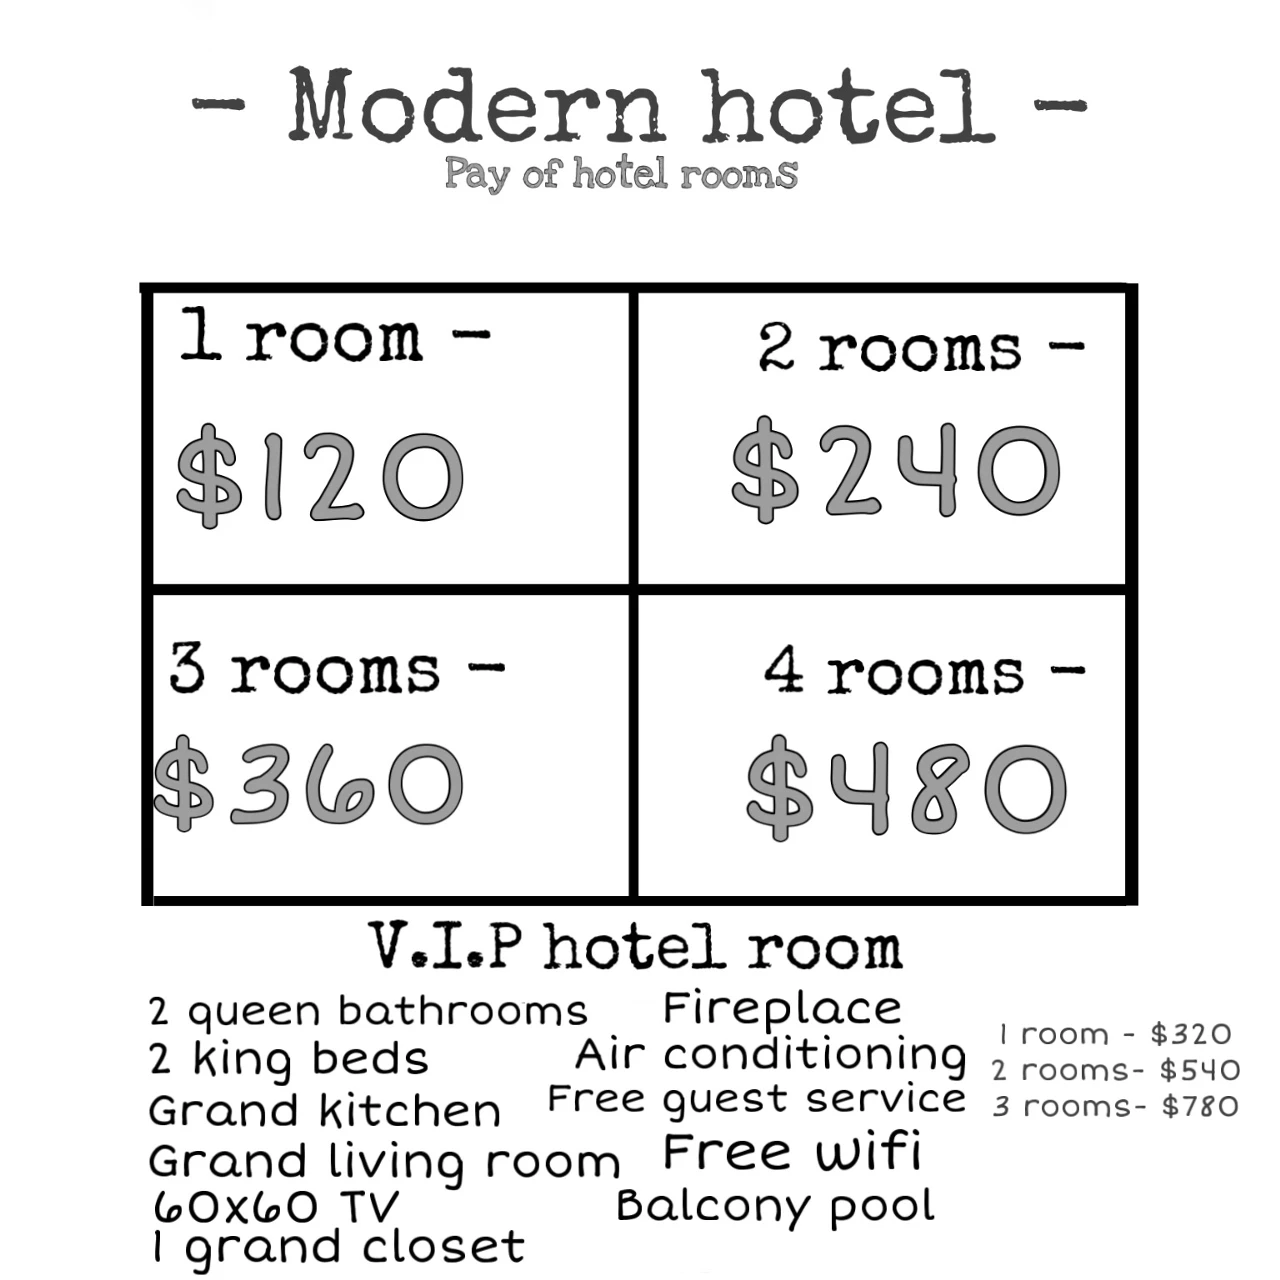 Roblox Hotel Modern Rooms Image By Bloxburg Decals